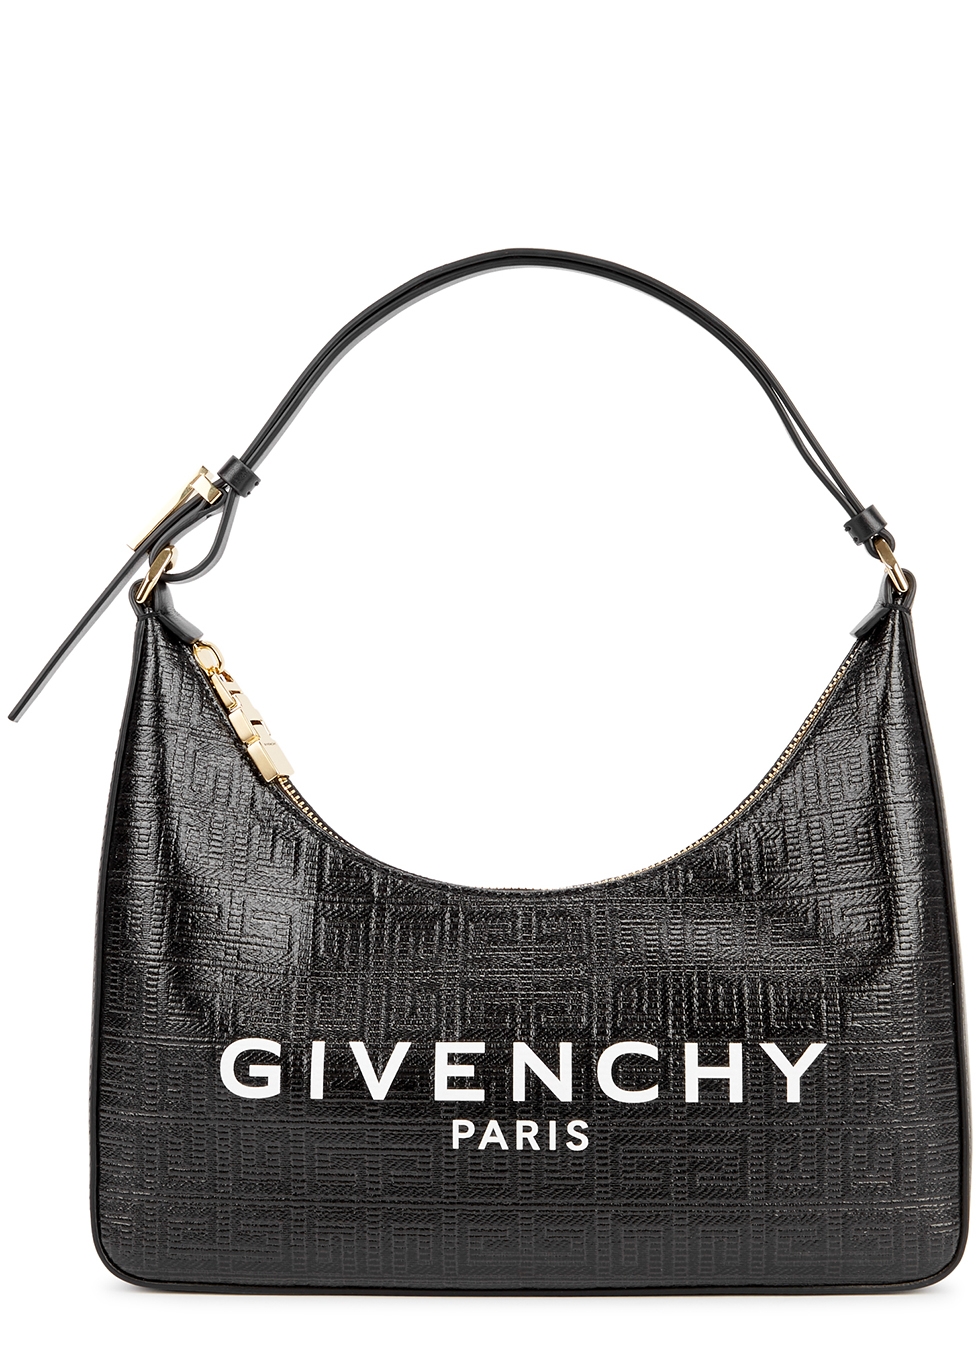 Givenchy Moon Cut Out small black leather shoulder bag - Harvey Nichols